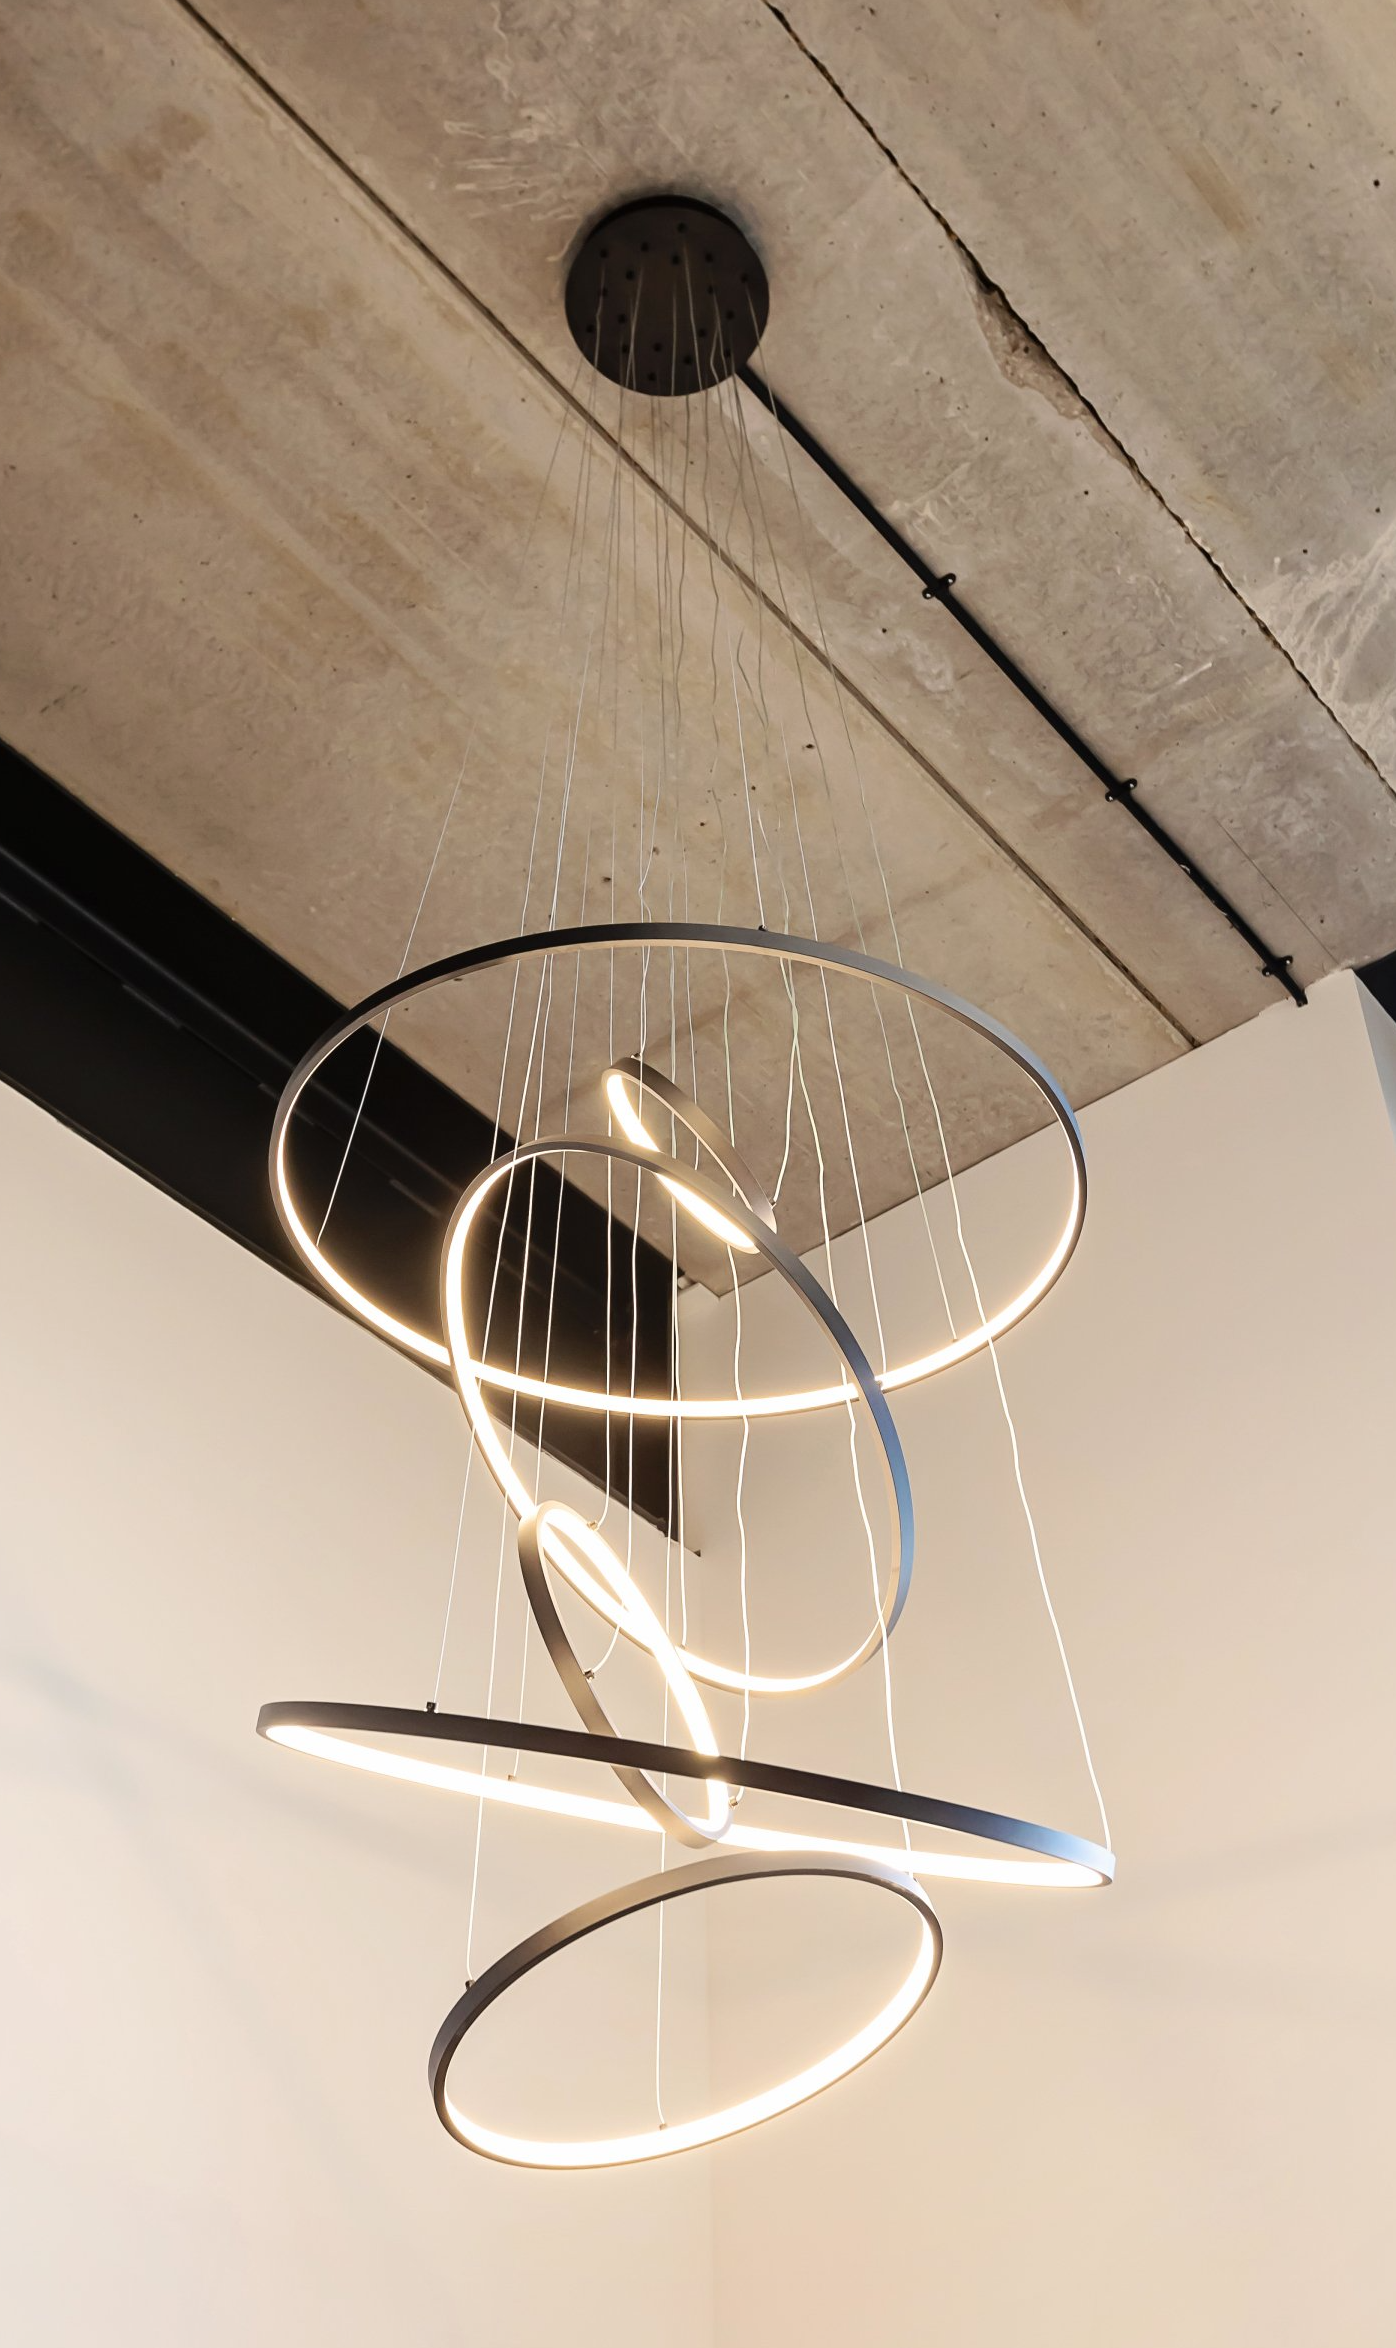 A circular light fixture is hanging from the ceiling